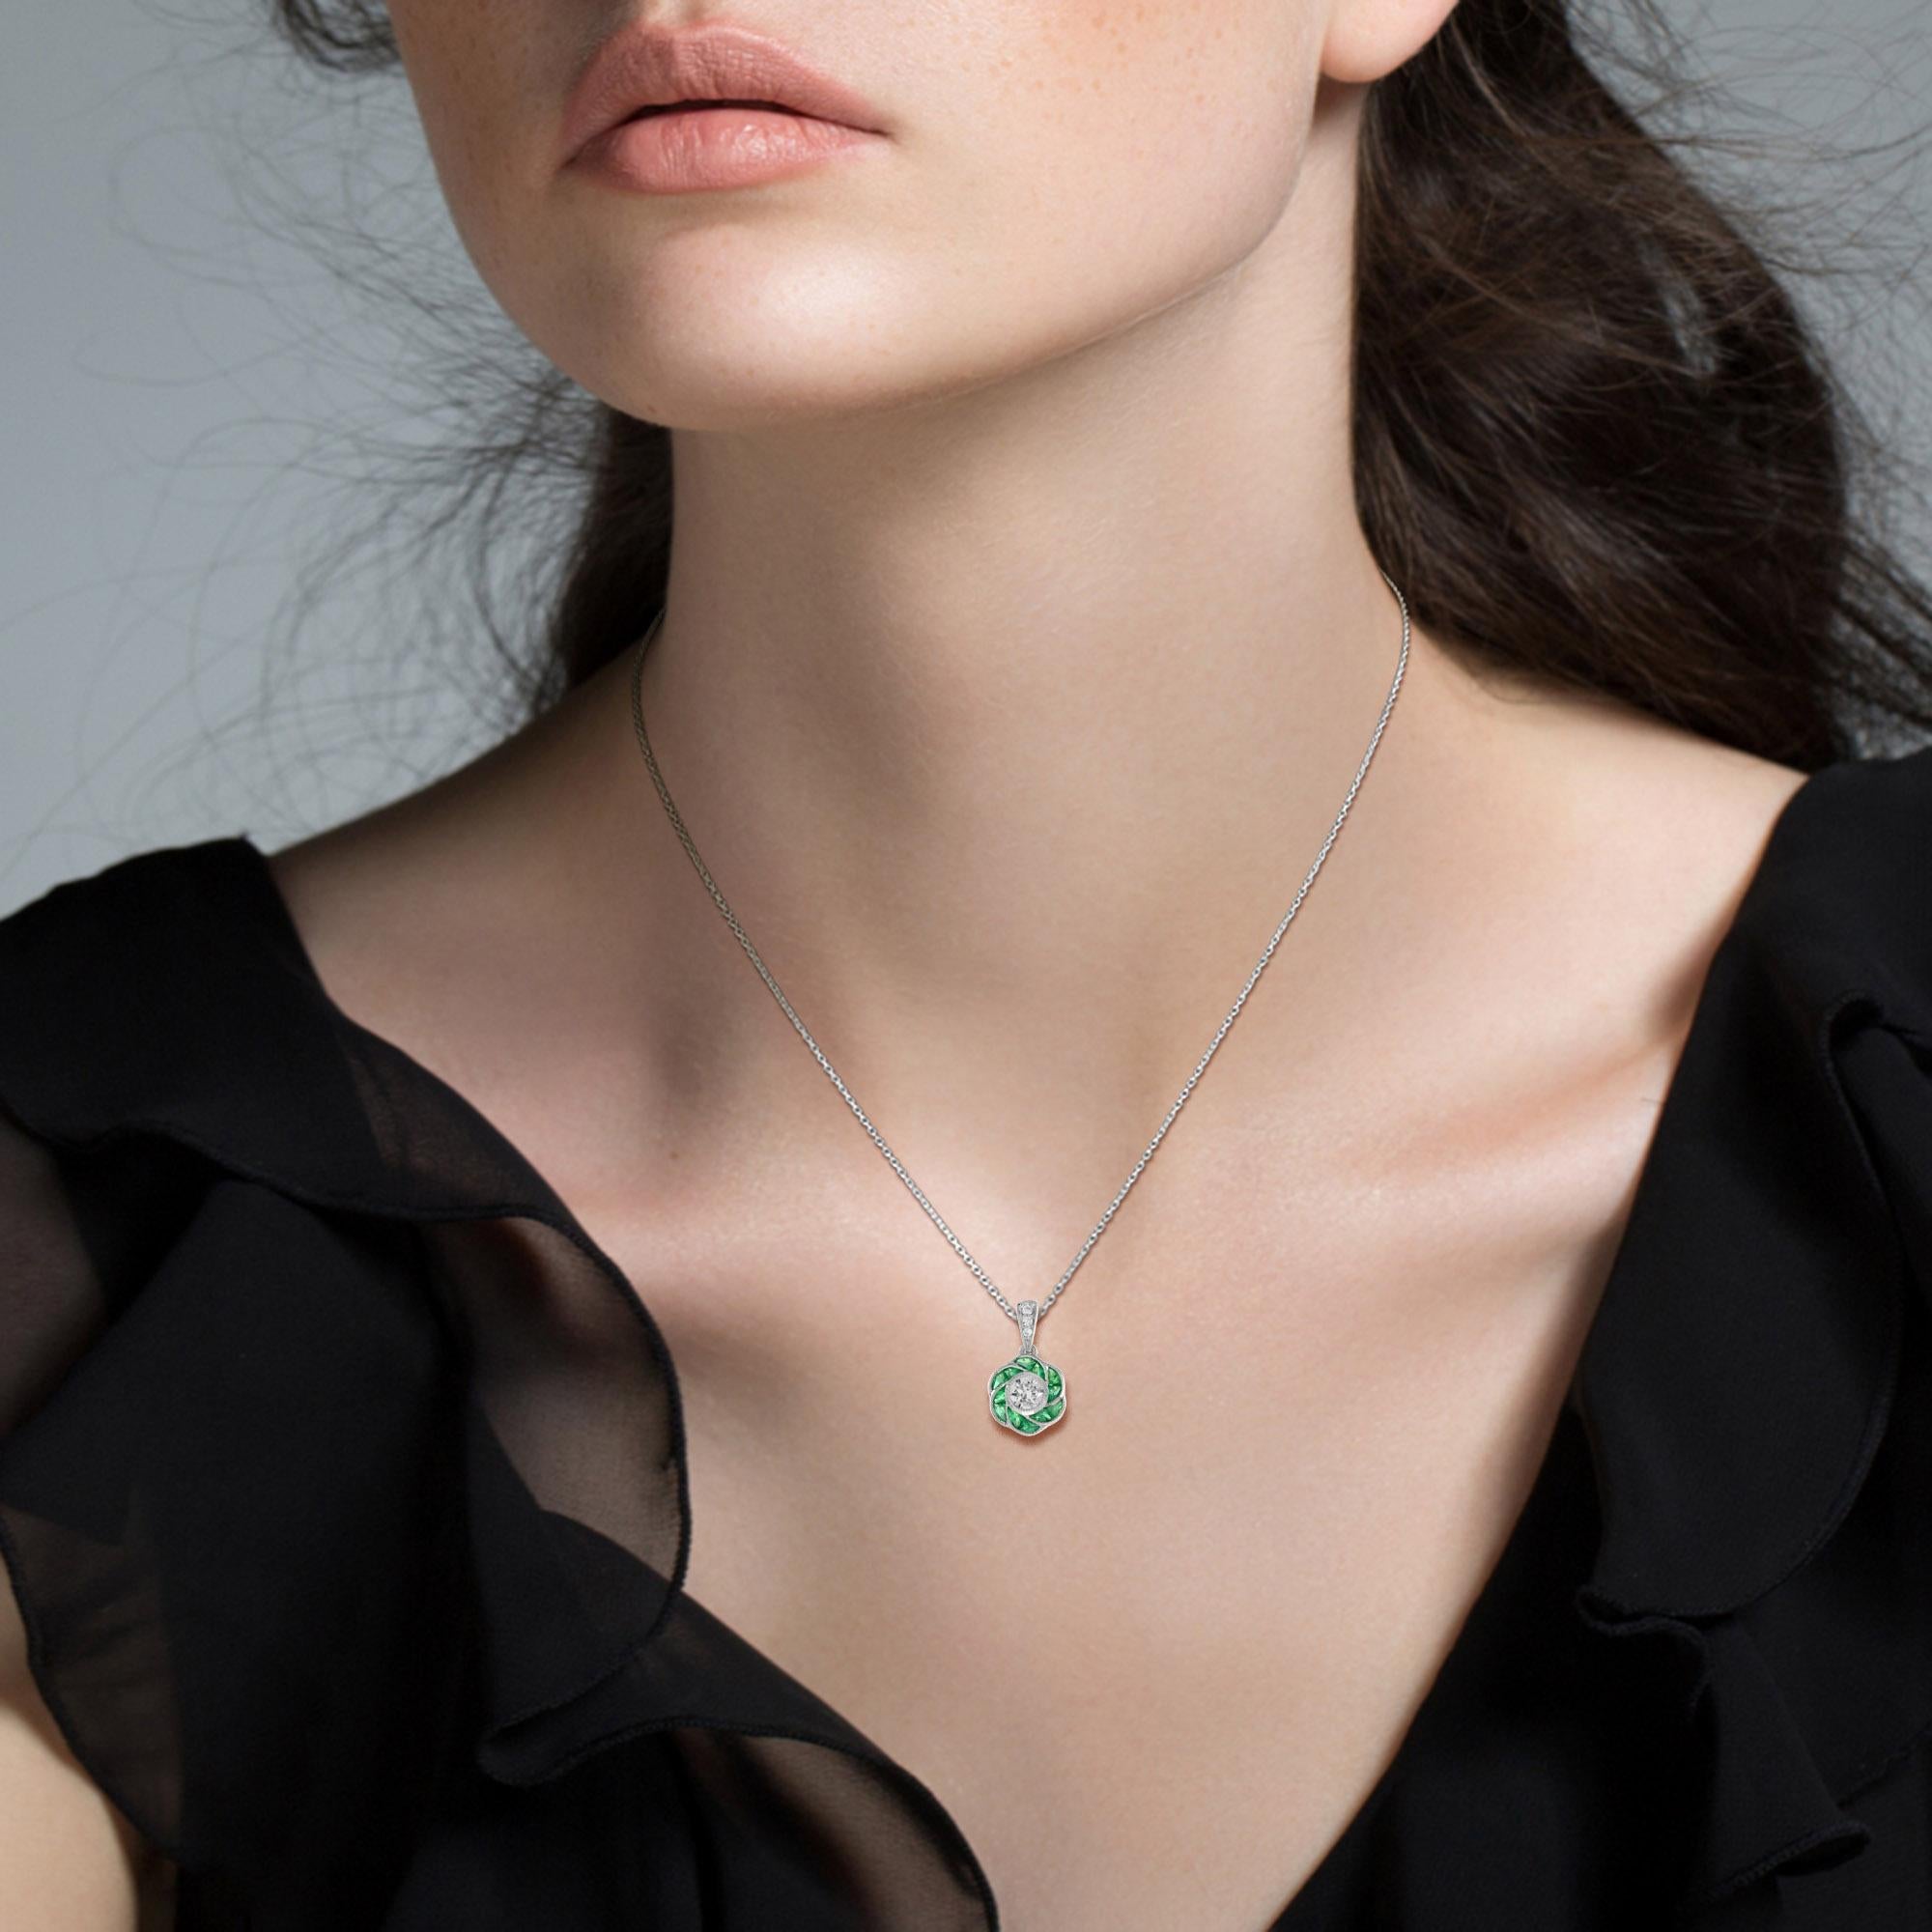 Perfect with everyday wear, this charming vintage Art Deco revivalist design pendant features brilliant-cut diamonds surrounded by French cut emerald for red rose petals finished look all in 18K white gold.

Information
Style: Art-deco
Metal: 18K